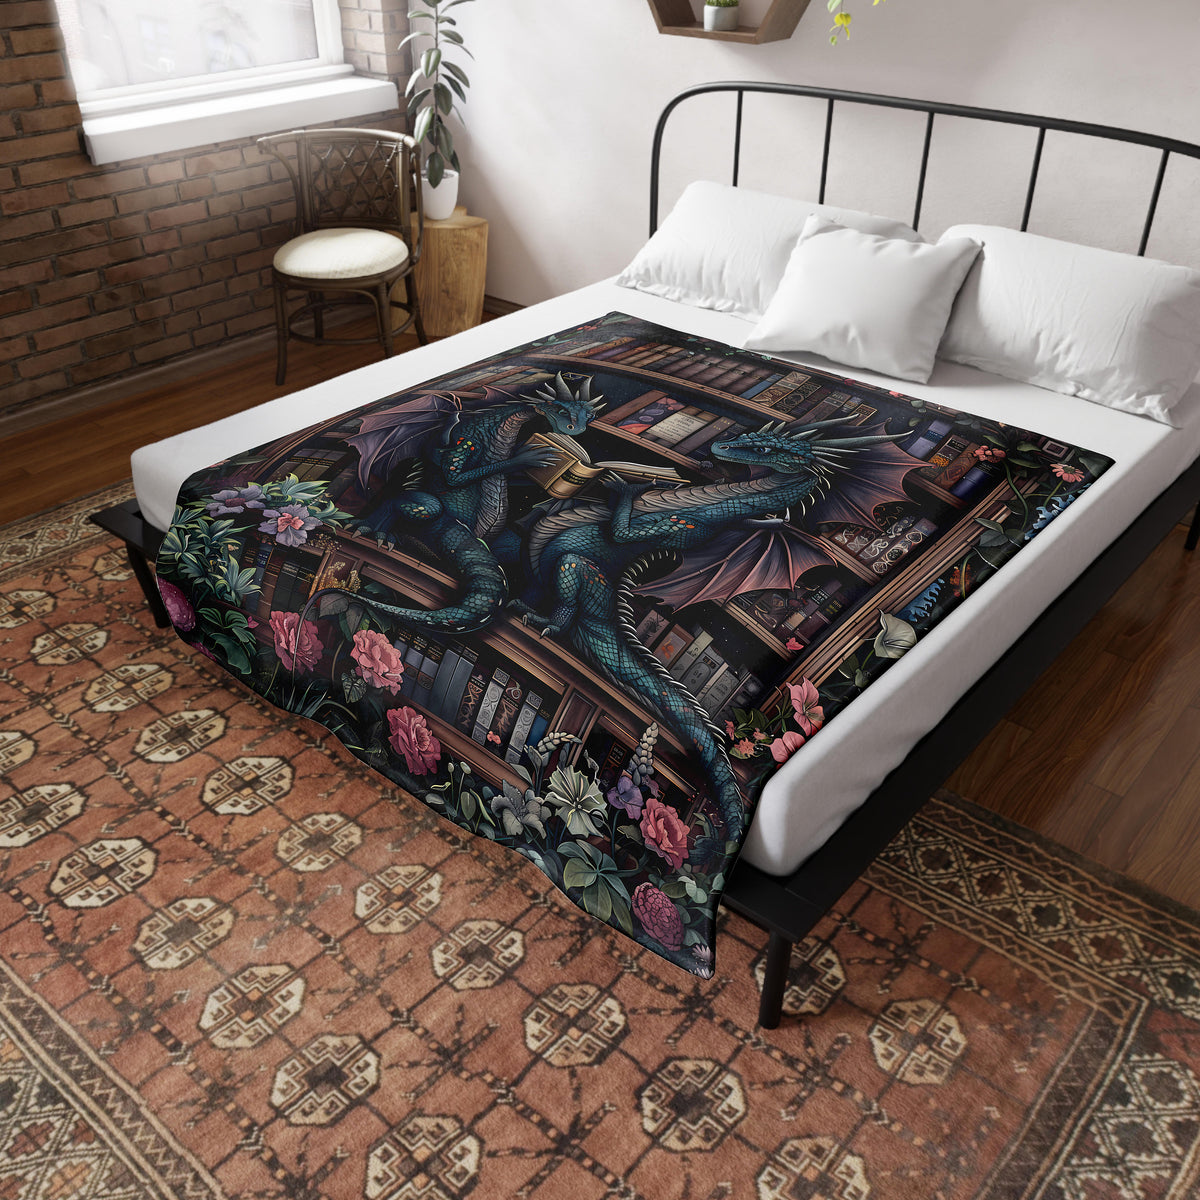 a bed with a dragon comforter on top of it